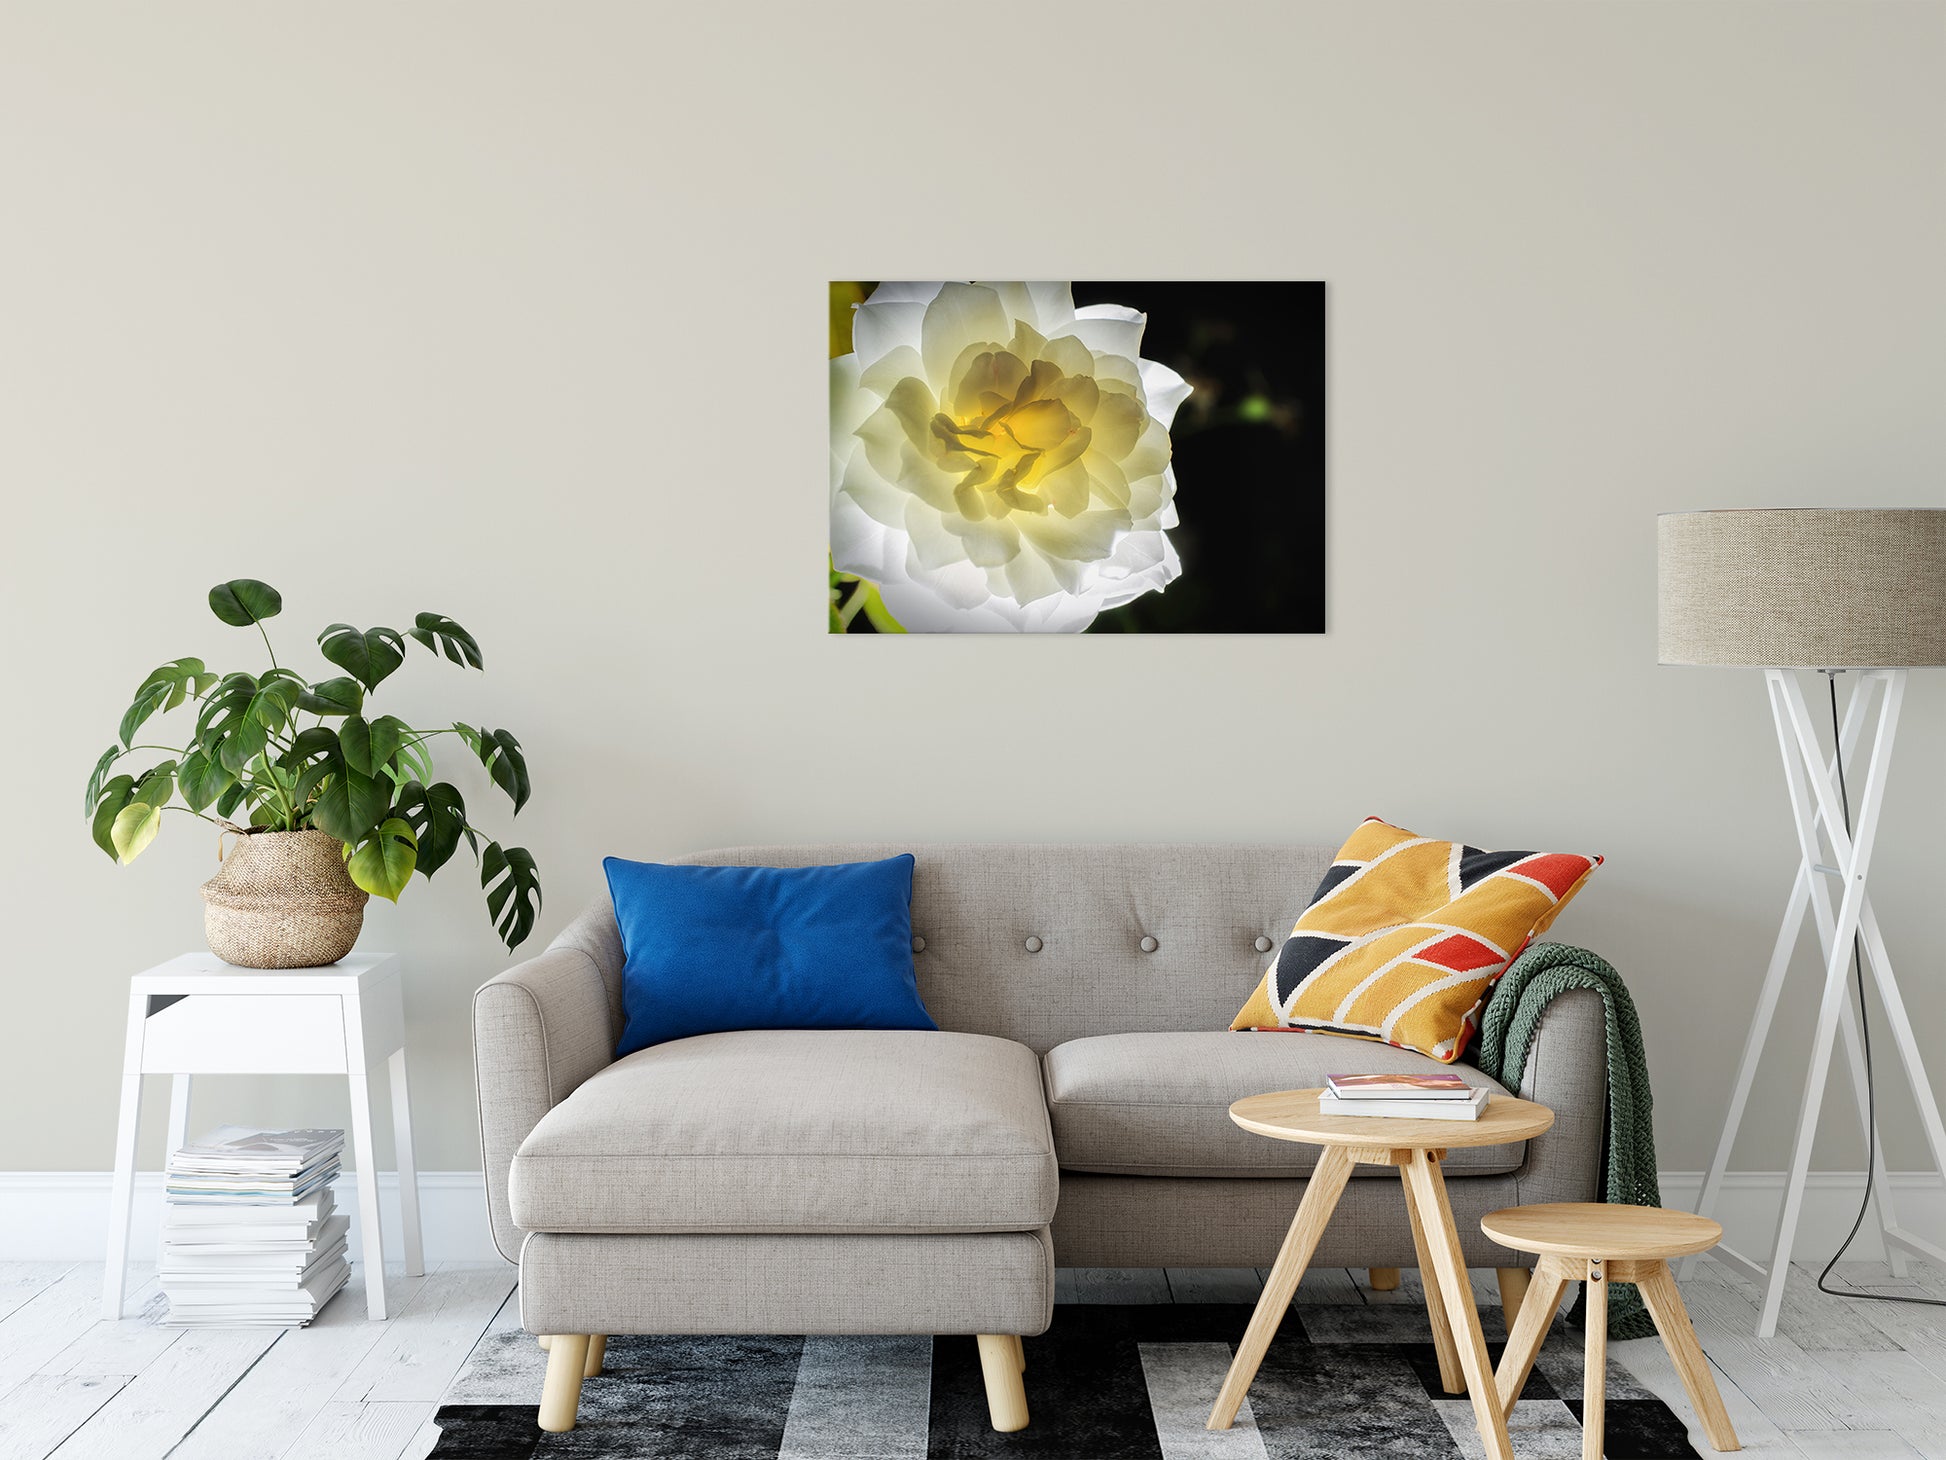 Glowing Rose 2 Nature / Floral Photo Fine Art Canvas Wall Art Prints 24" x 36" - PIPAFINEART